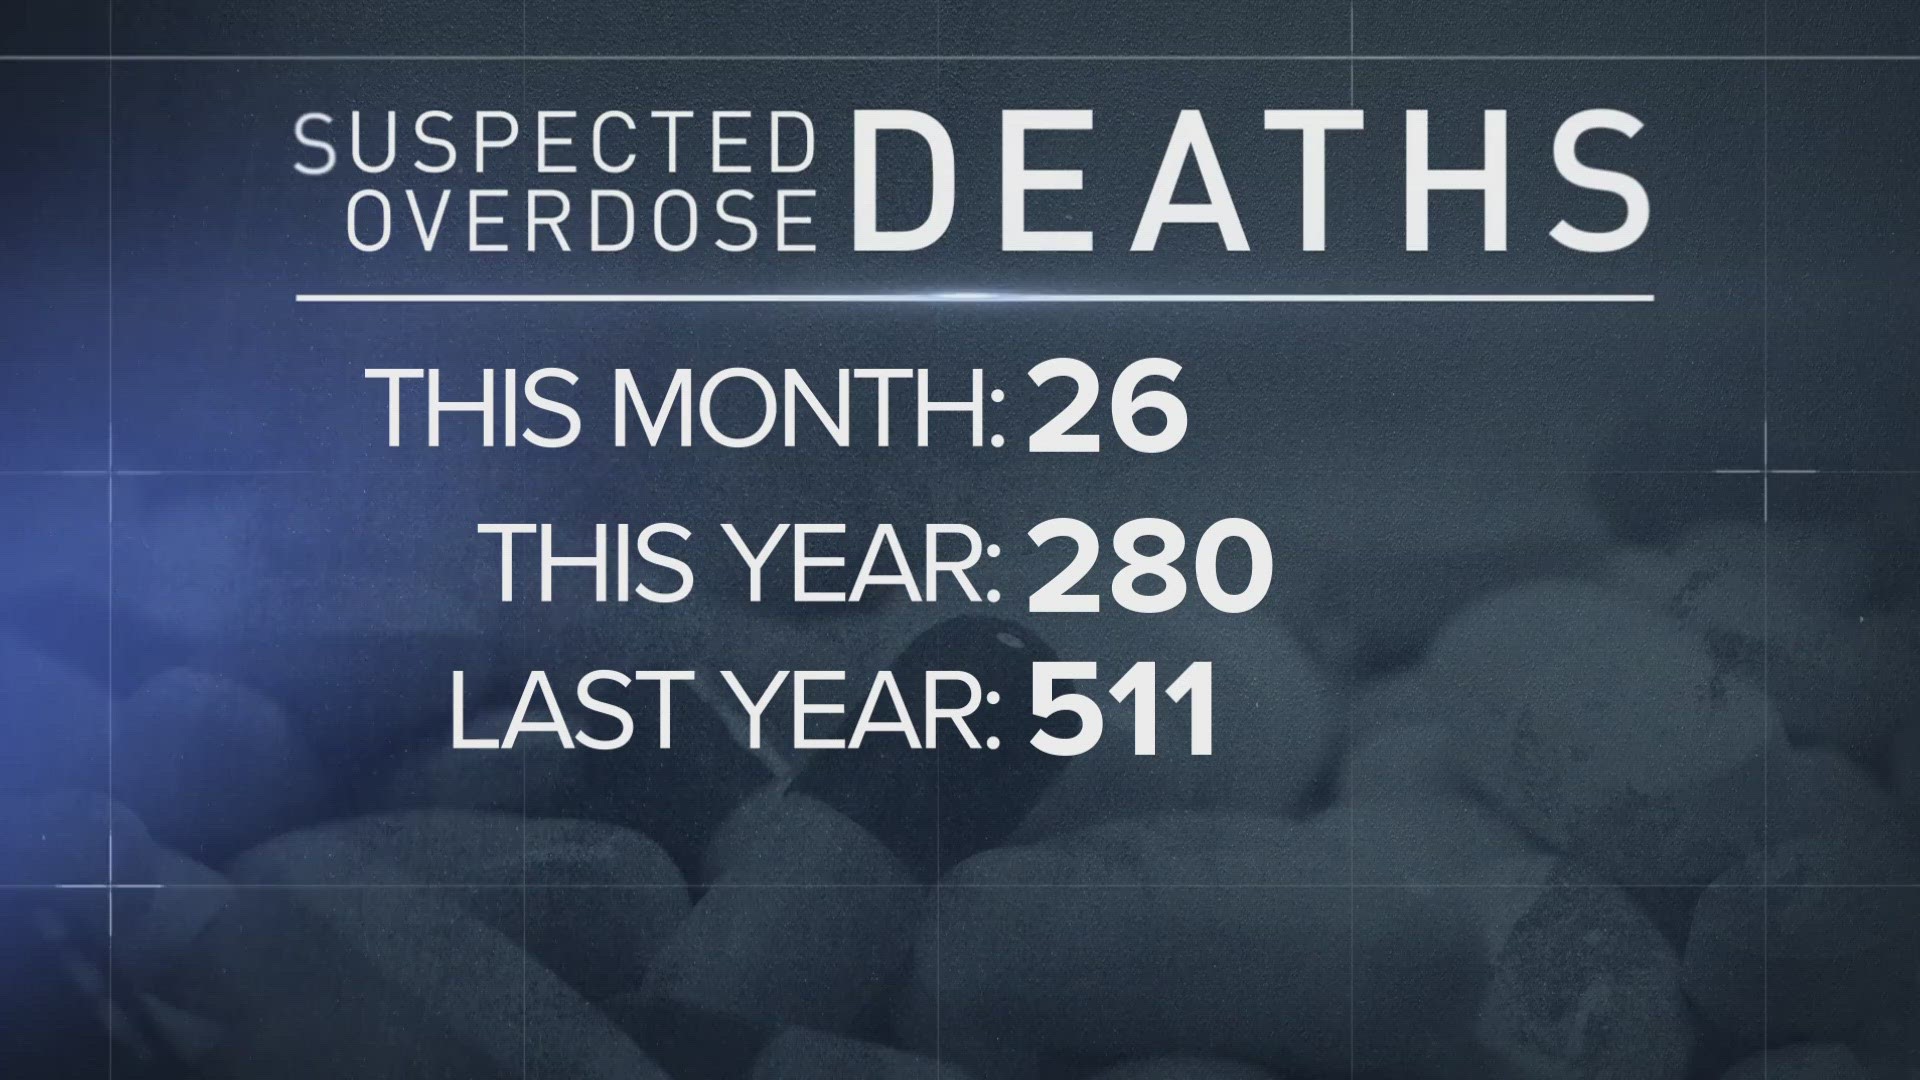 According to those reports, there were 544 drug-related deaths in Knox County in 2022.